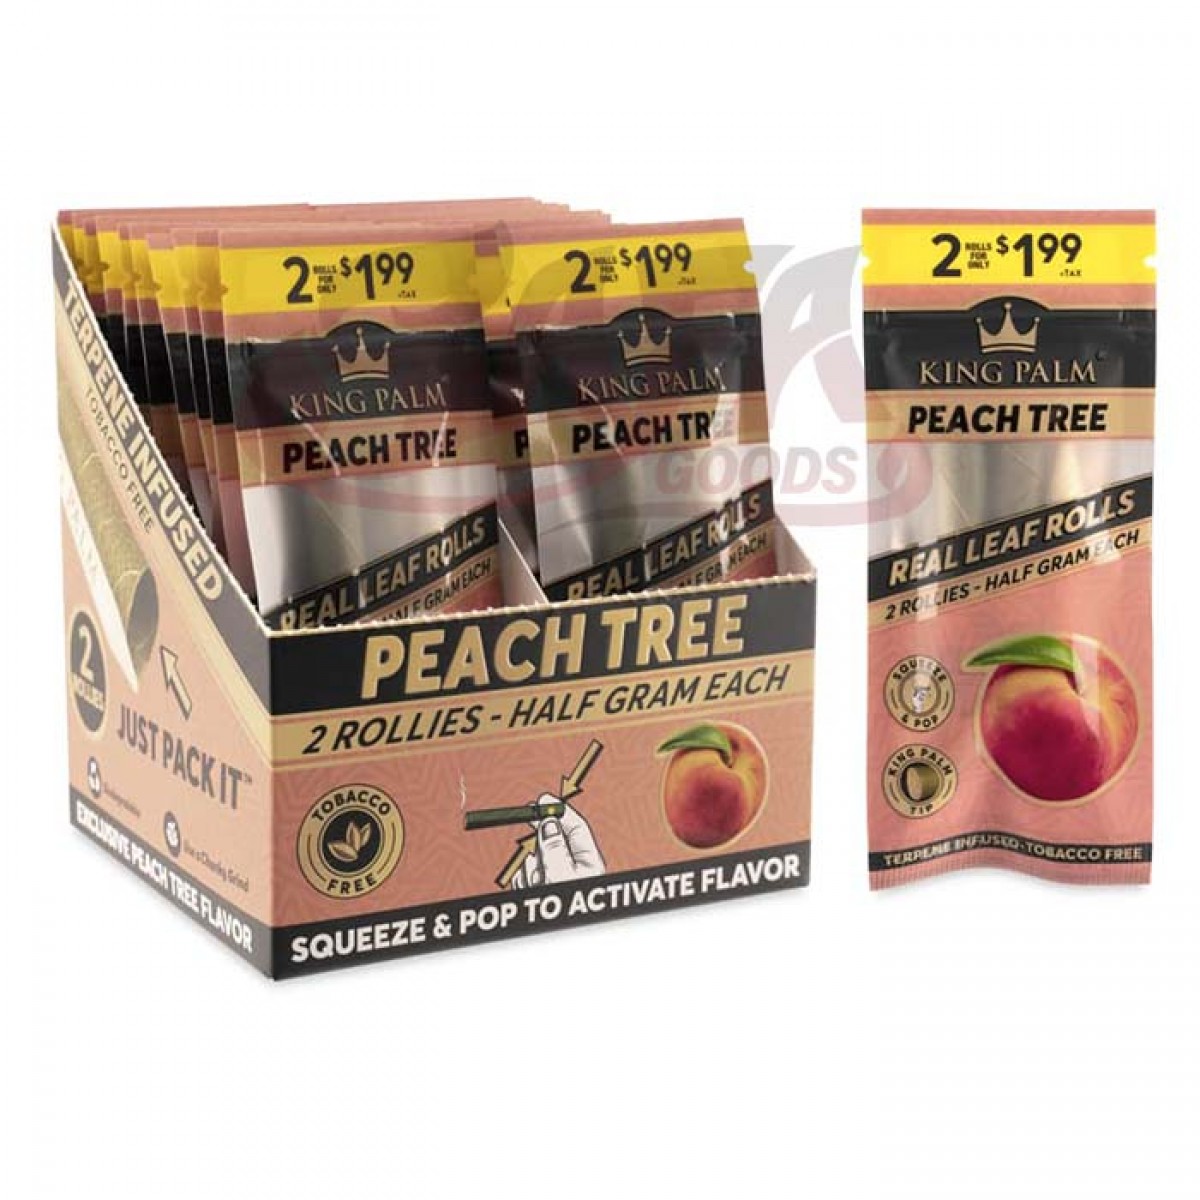 King Palm - FLAVORED Rollie Size 20CT/2PK [2/1.99]